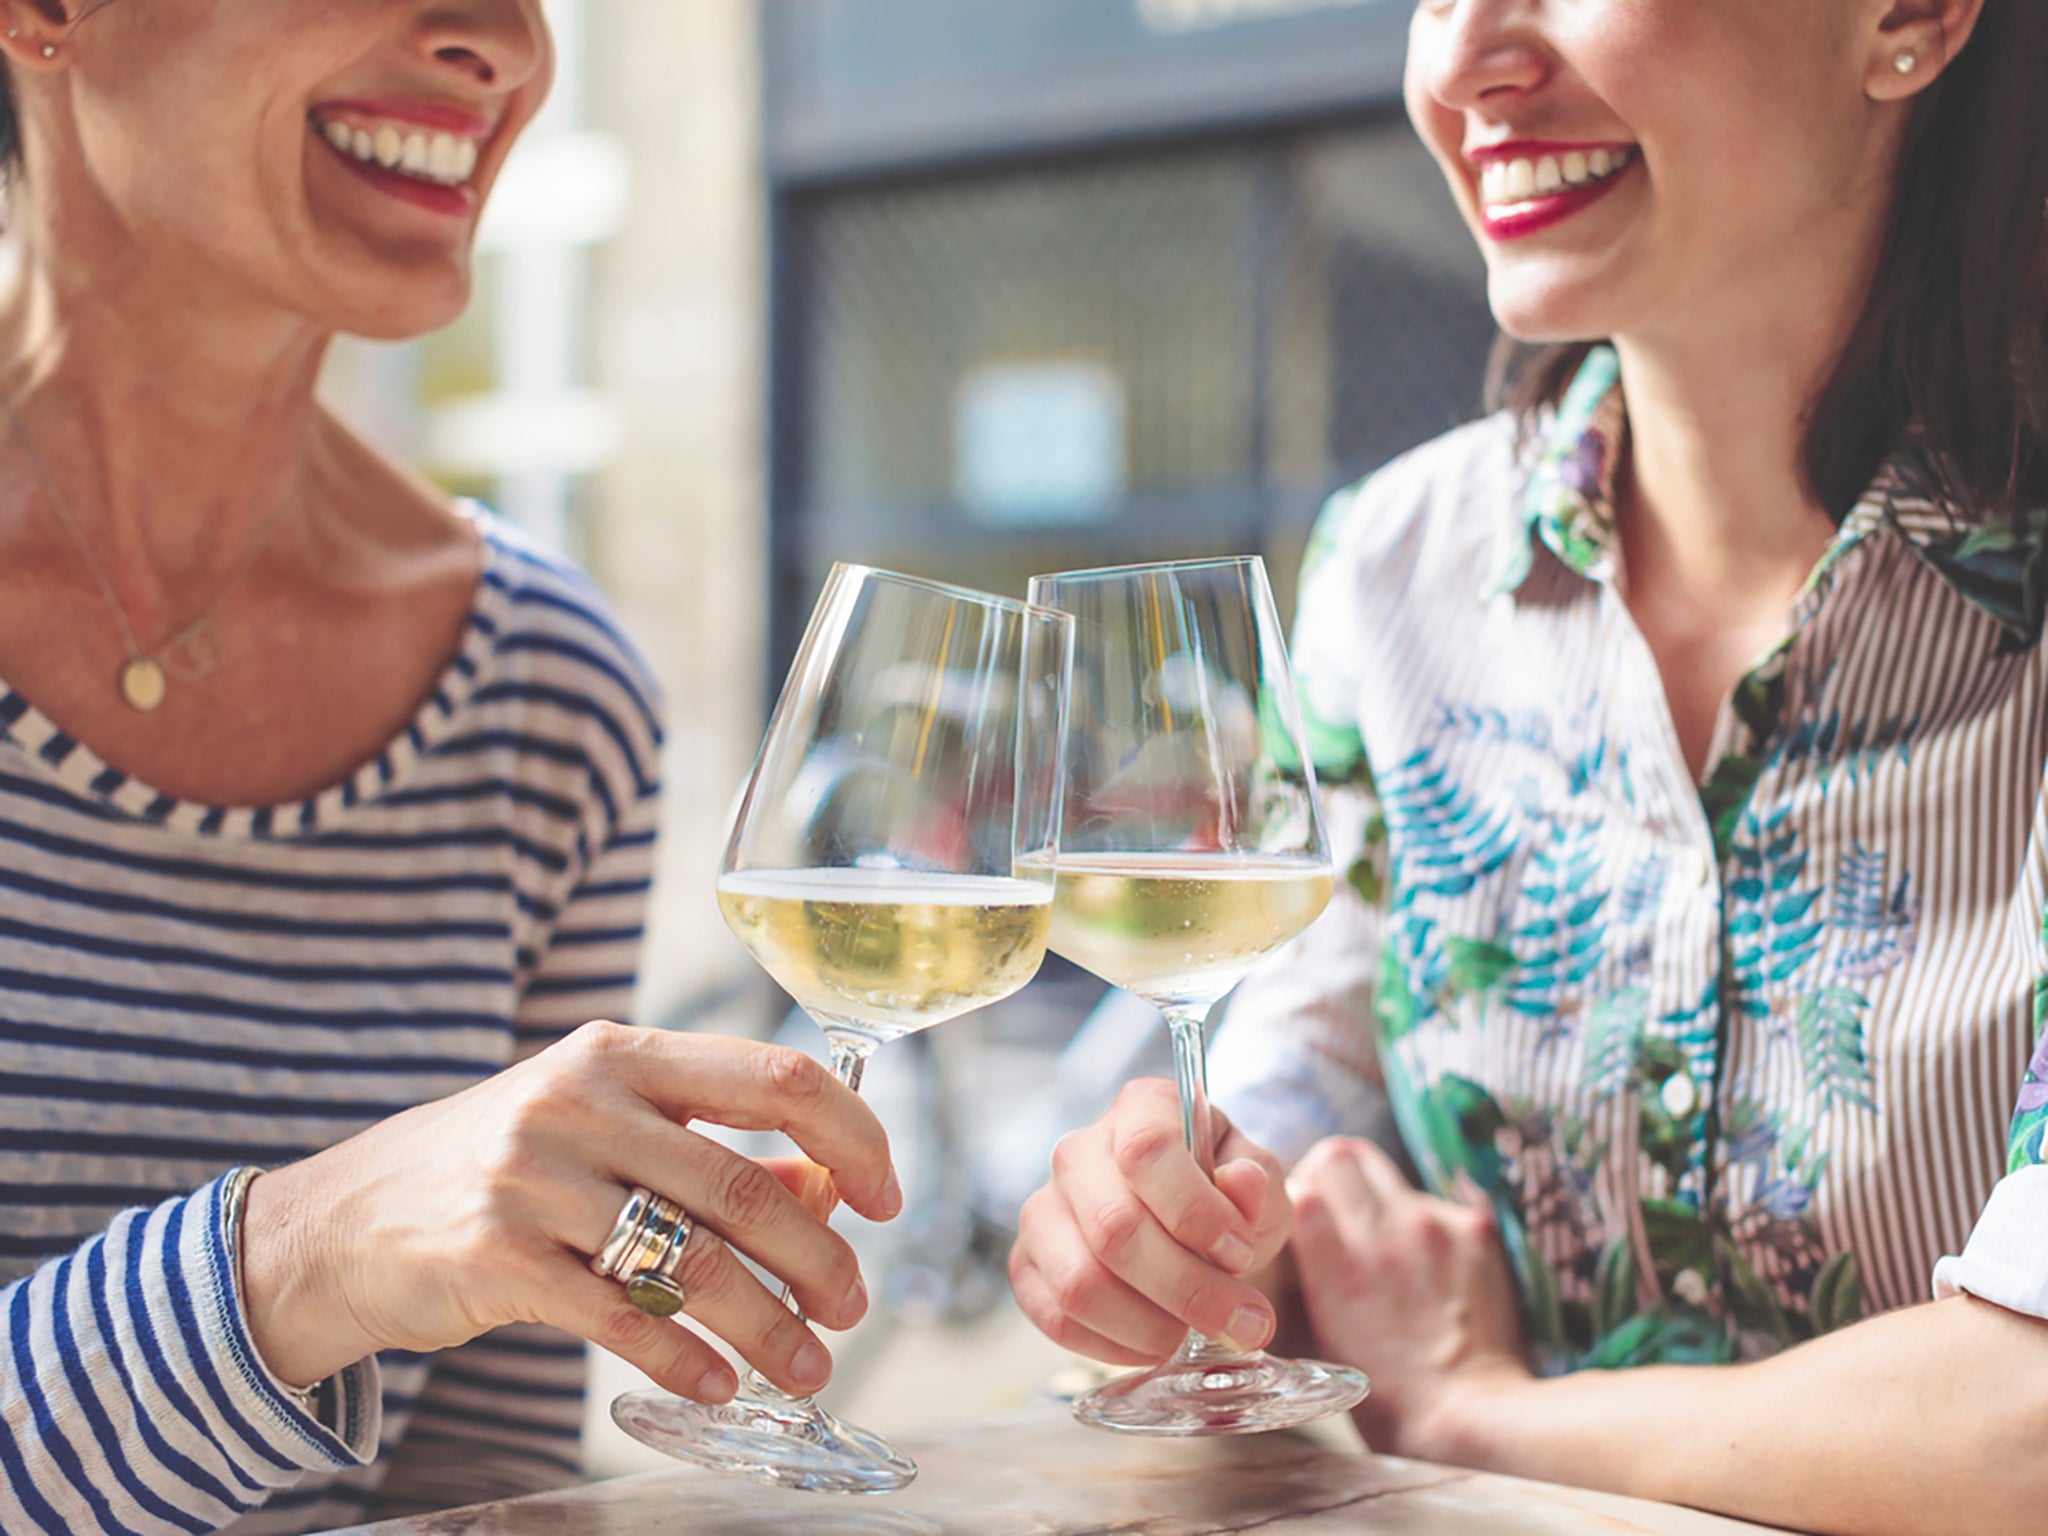 These wines are sure to make this Mother’s Day memorable